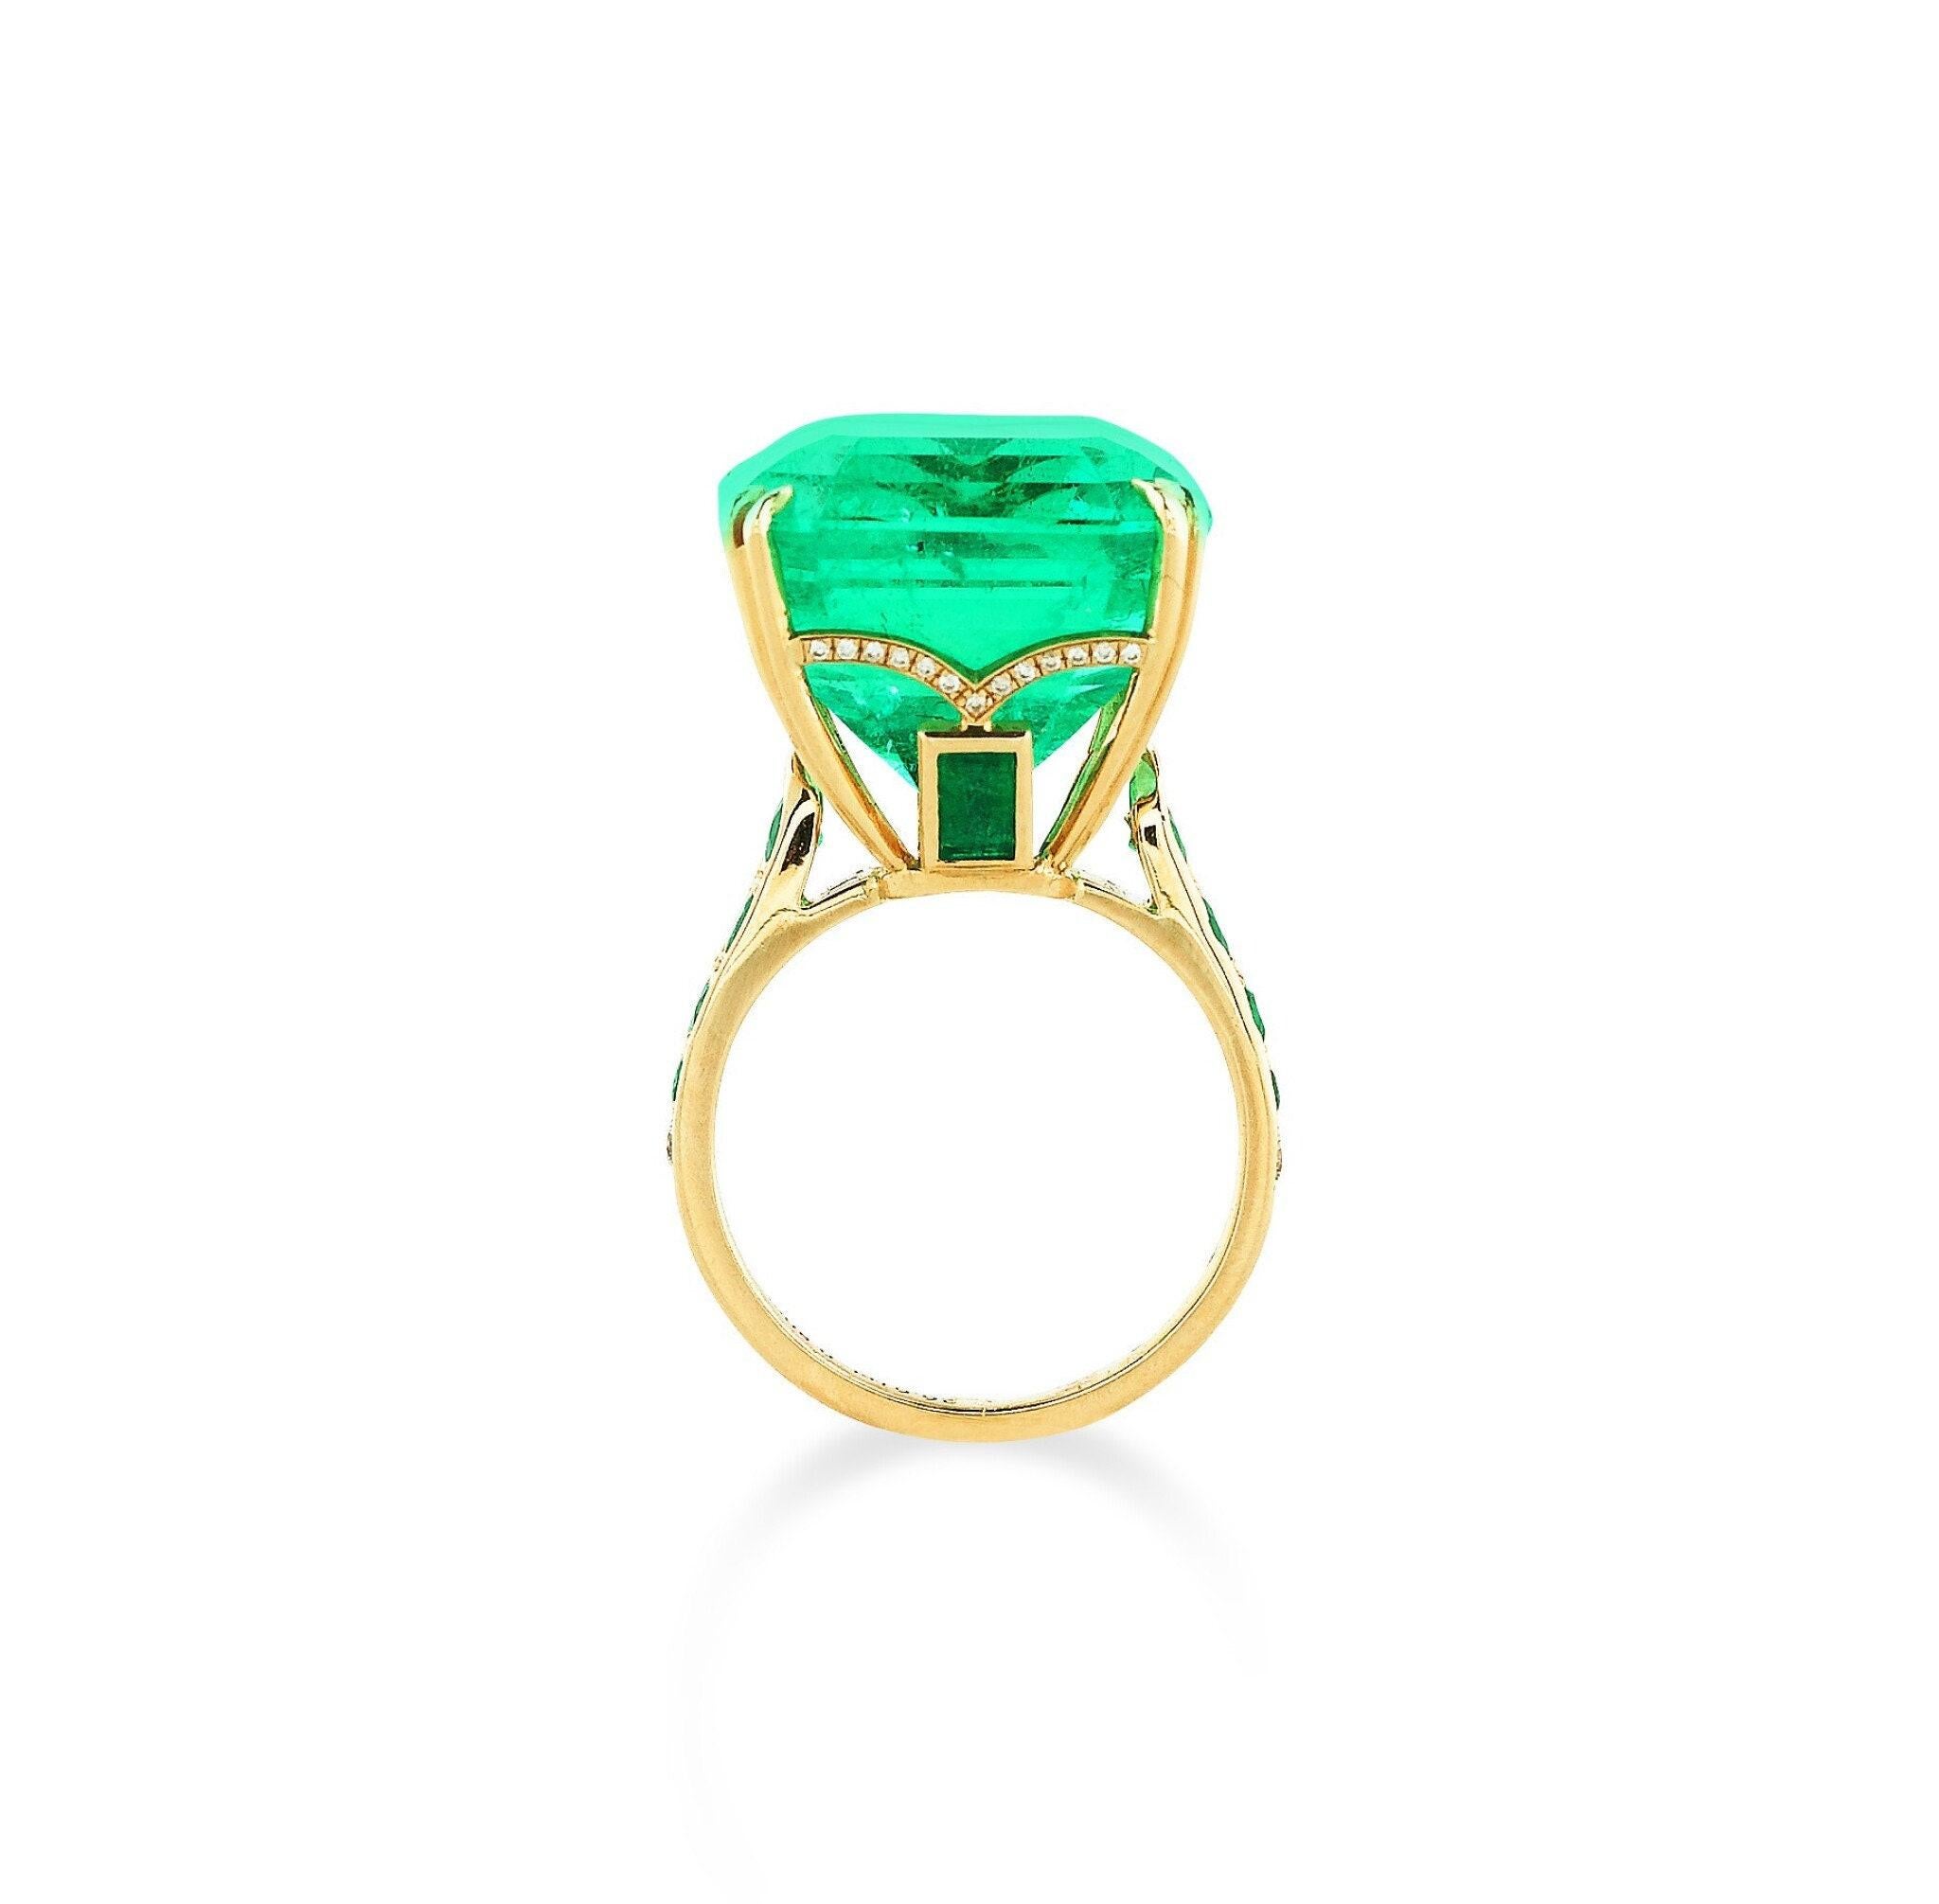 For Sale:  5 Carat Natural Emerald Diamond Engagement Ring Set in 18K Gold Cocktail Ring 3